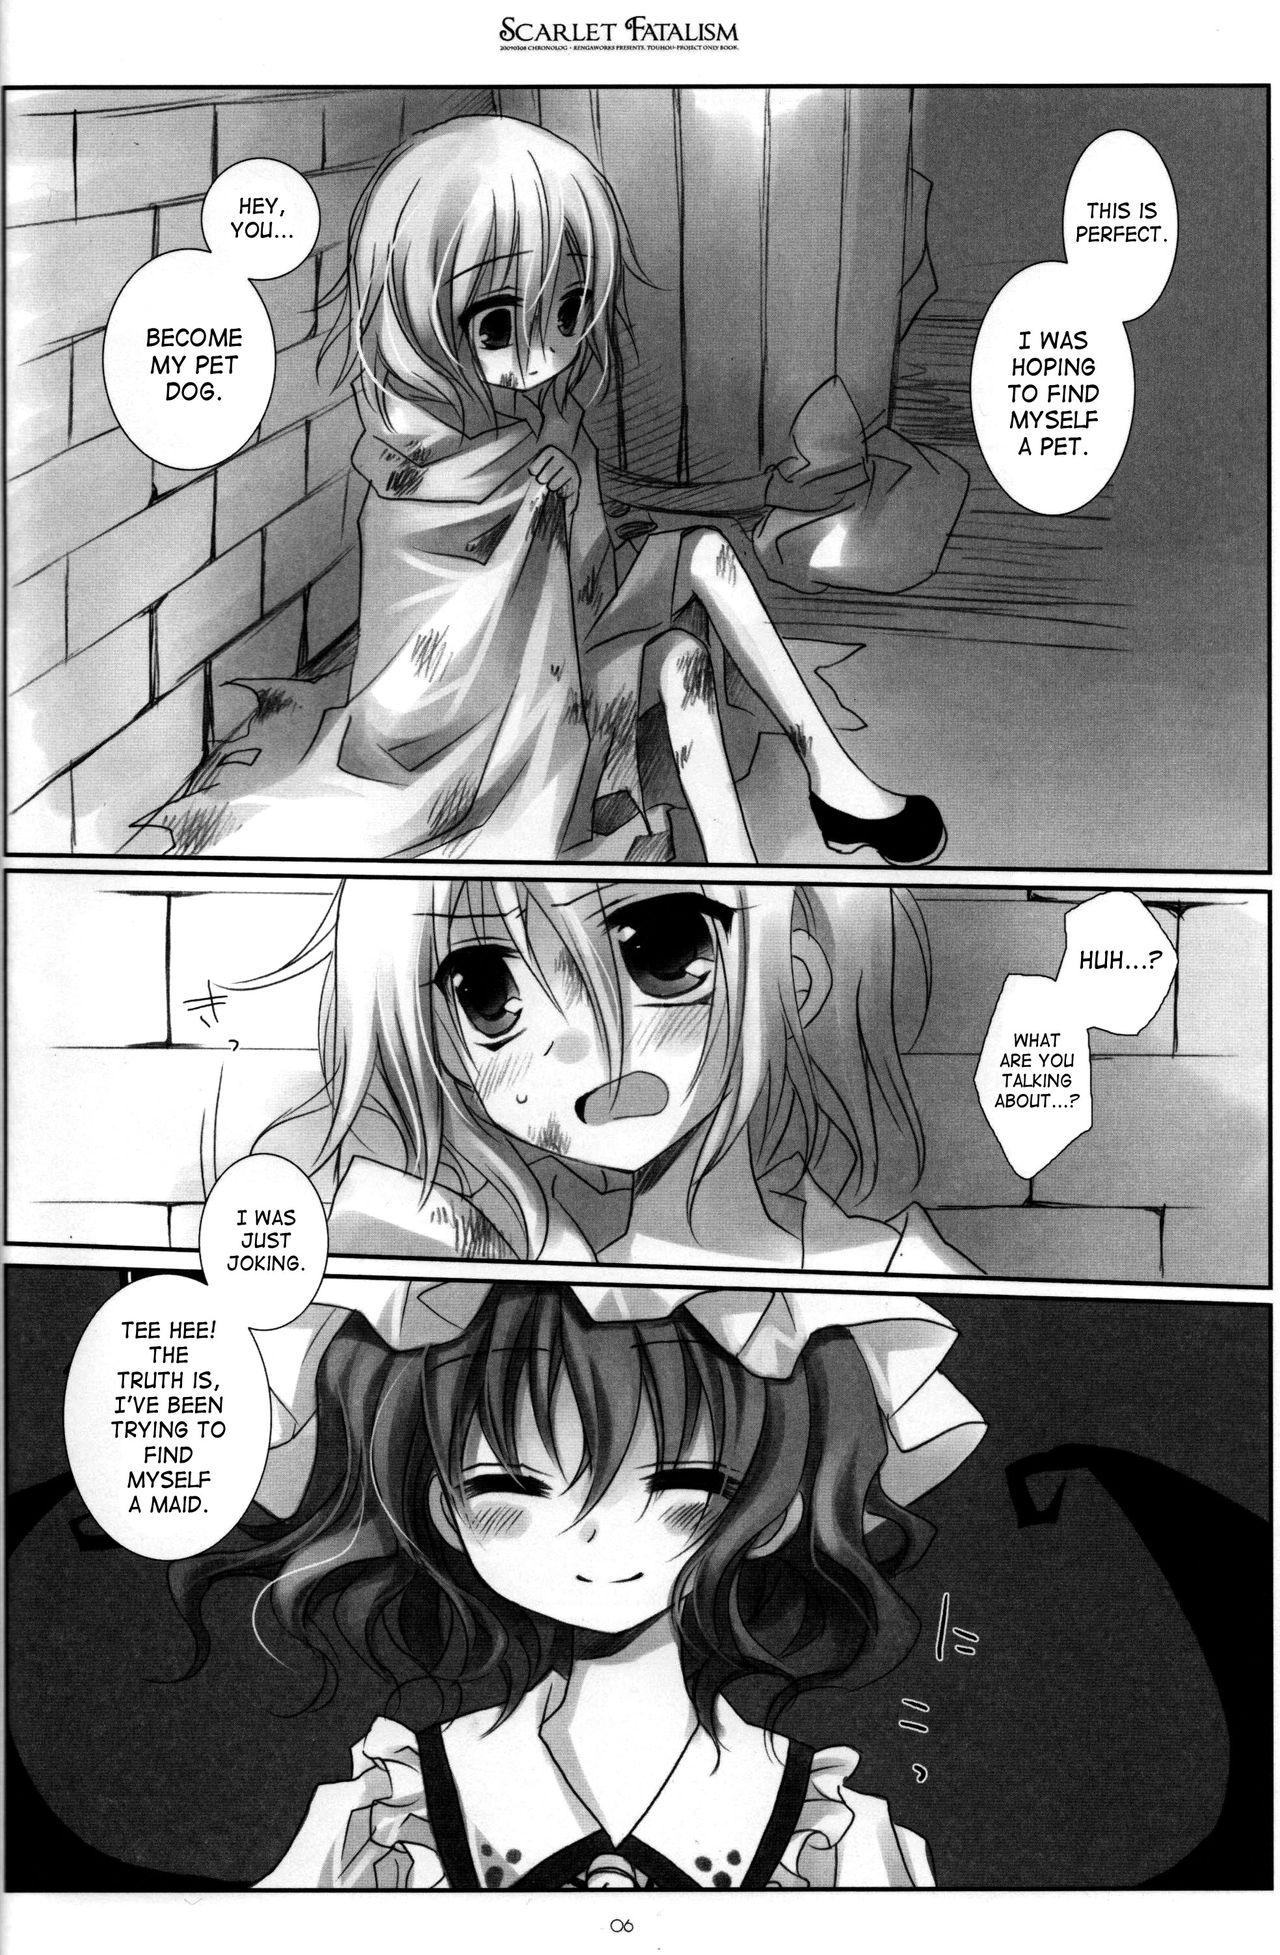 Lesbian Scarlet Fatalism - Touhou project Cumming - Page 7